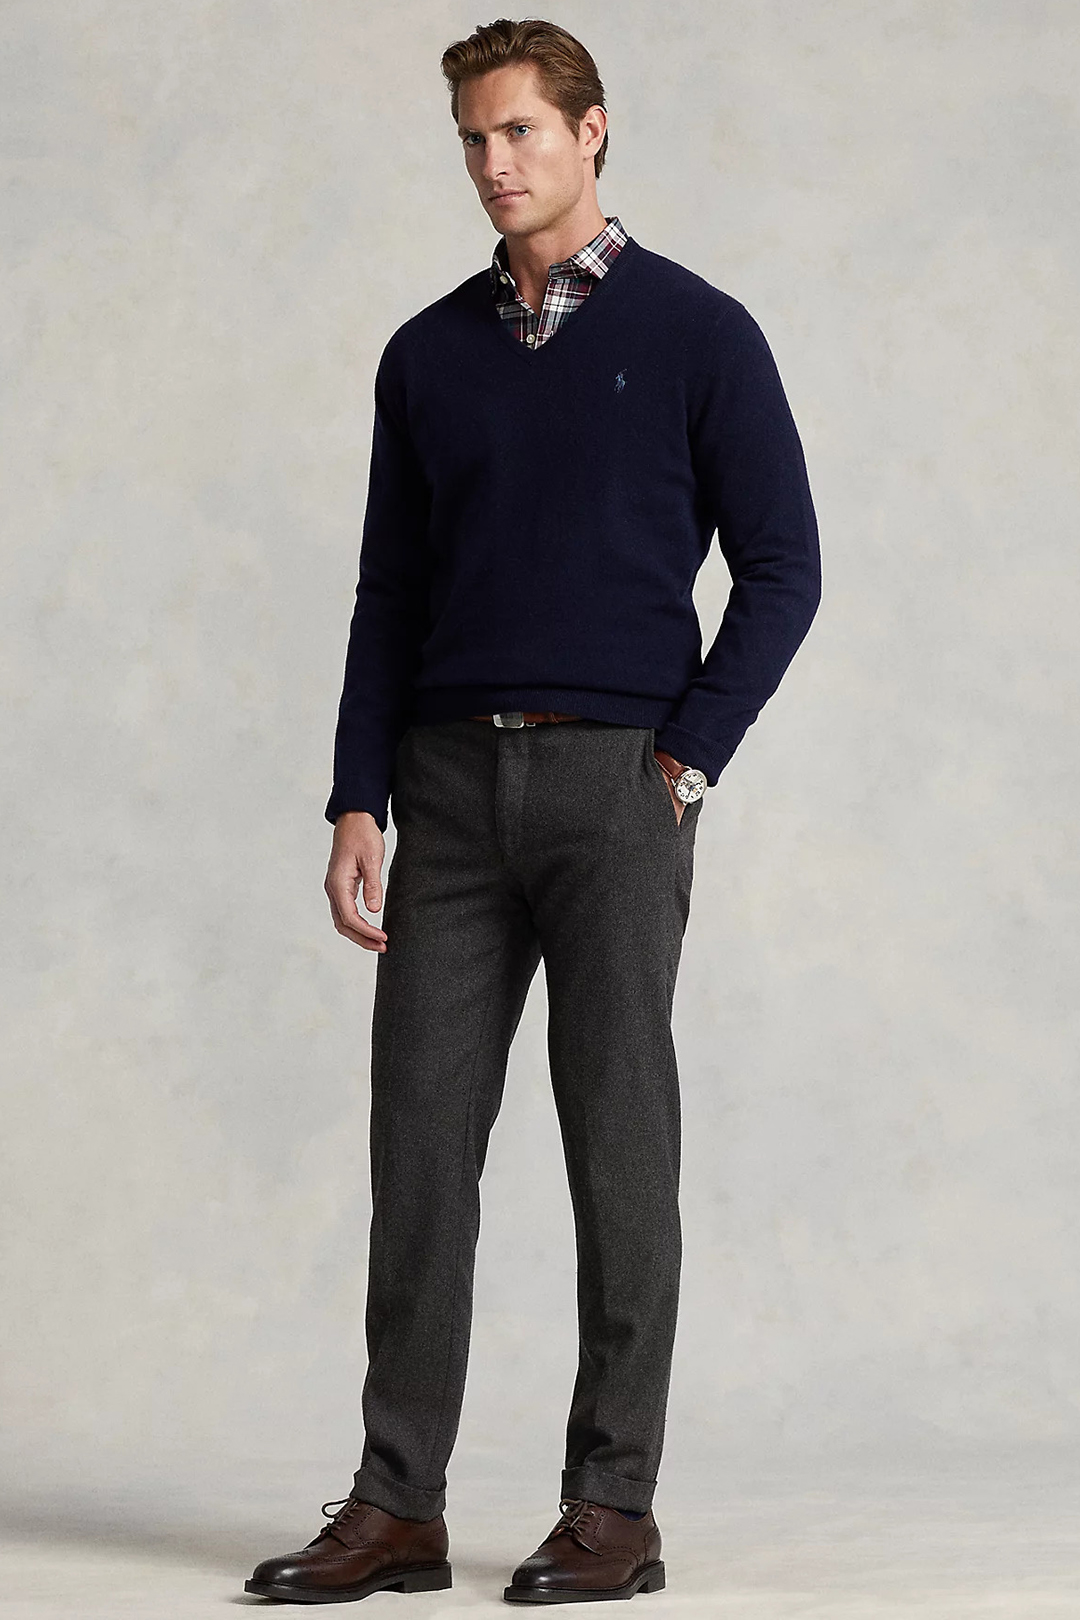 Navy v-neck sweater, multi-color shirt, gray dress pants, and brown derby brogues outfit